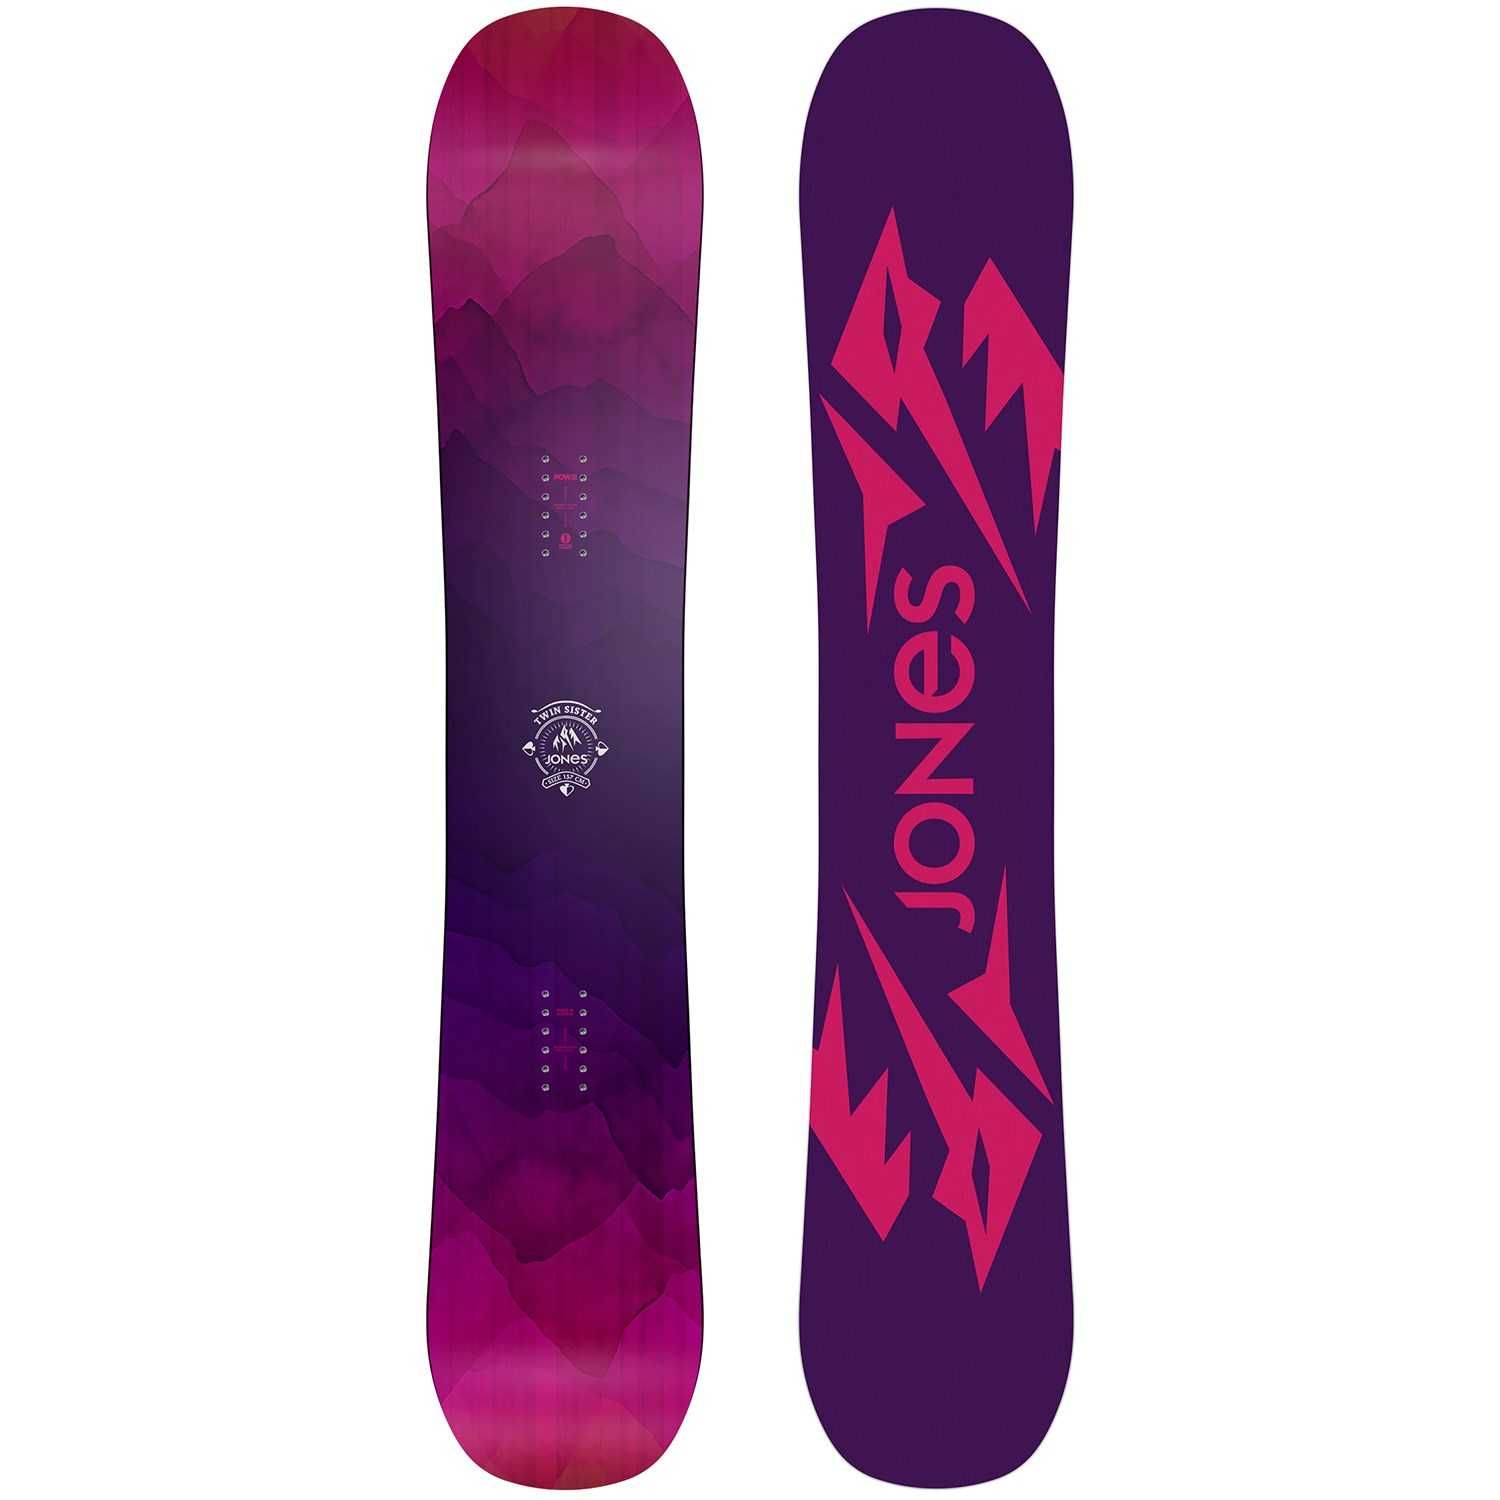 Pack Snowboard Twin Sister 2017 + Fixations